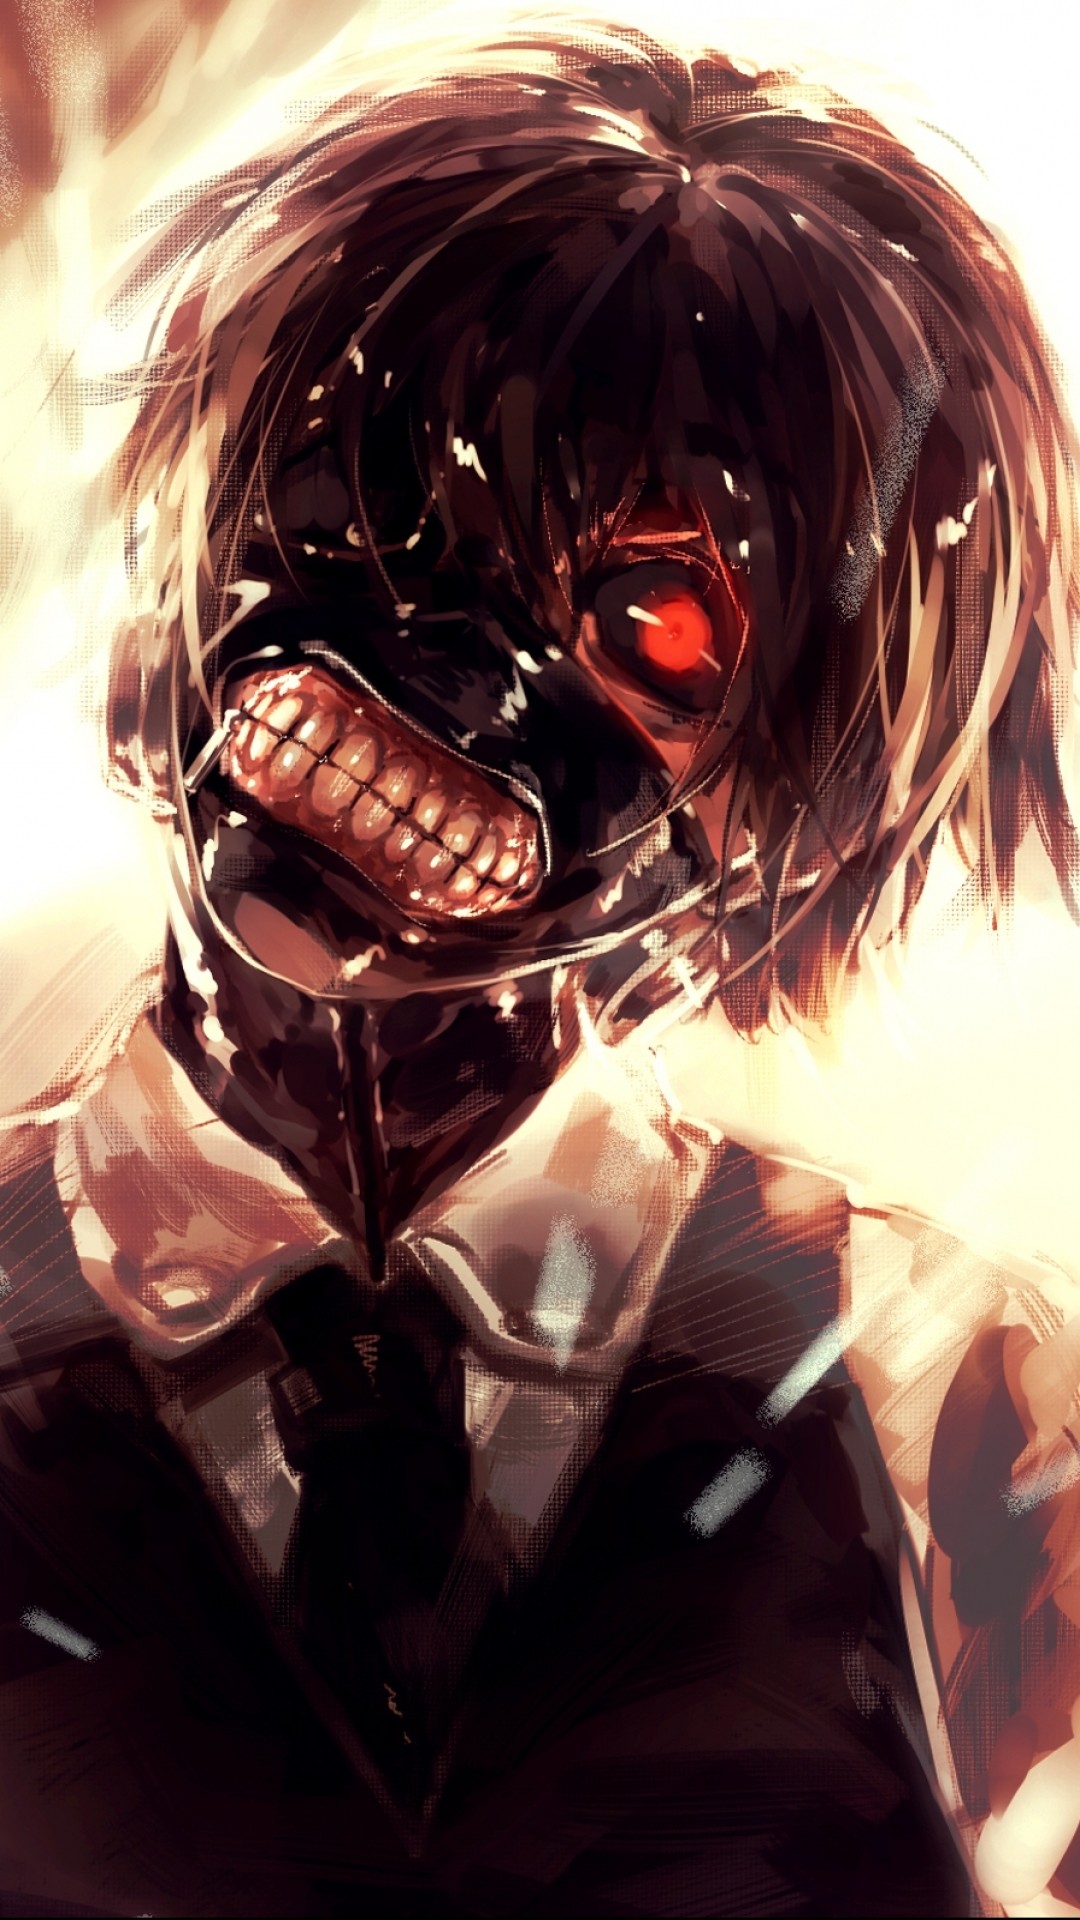 tokyo ghoul wallpaper 1080x1920,anime,cg artwork,fictional character,mouth,illustration